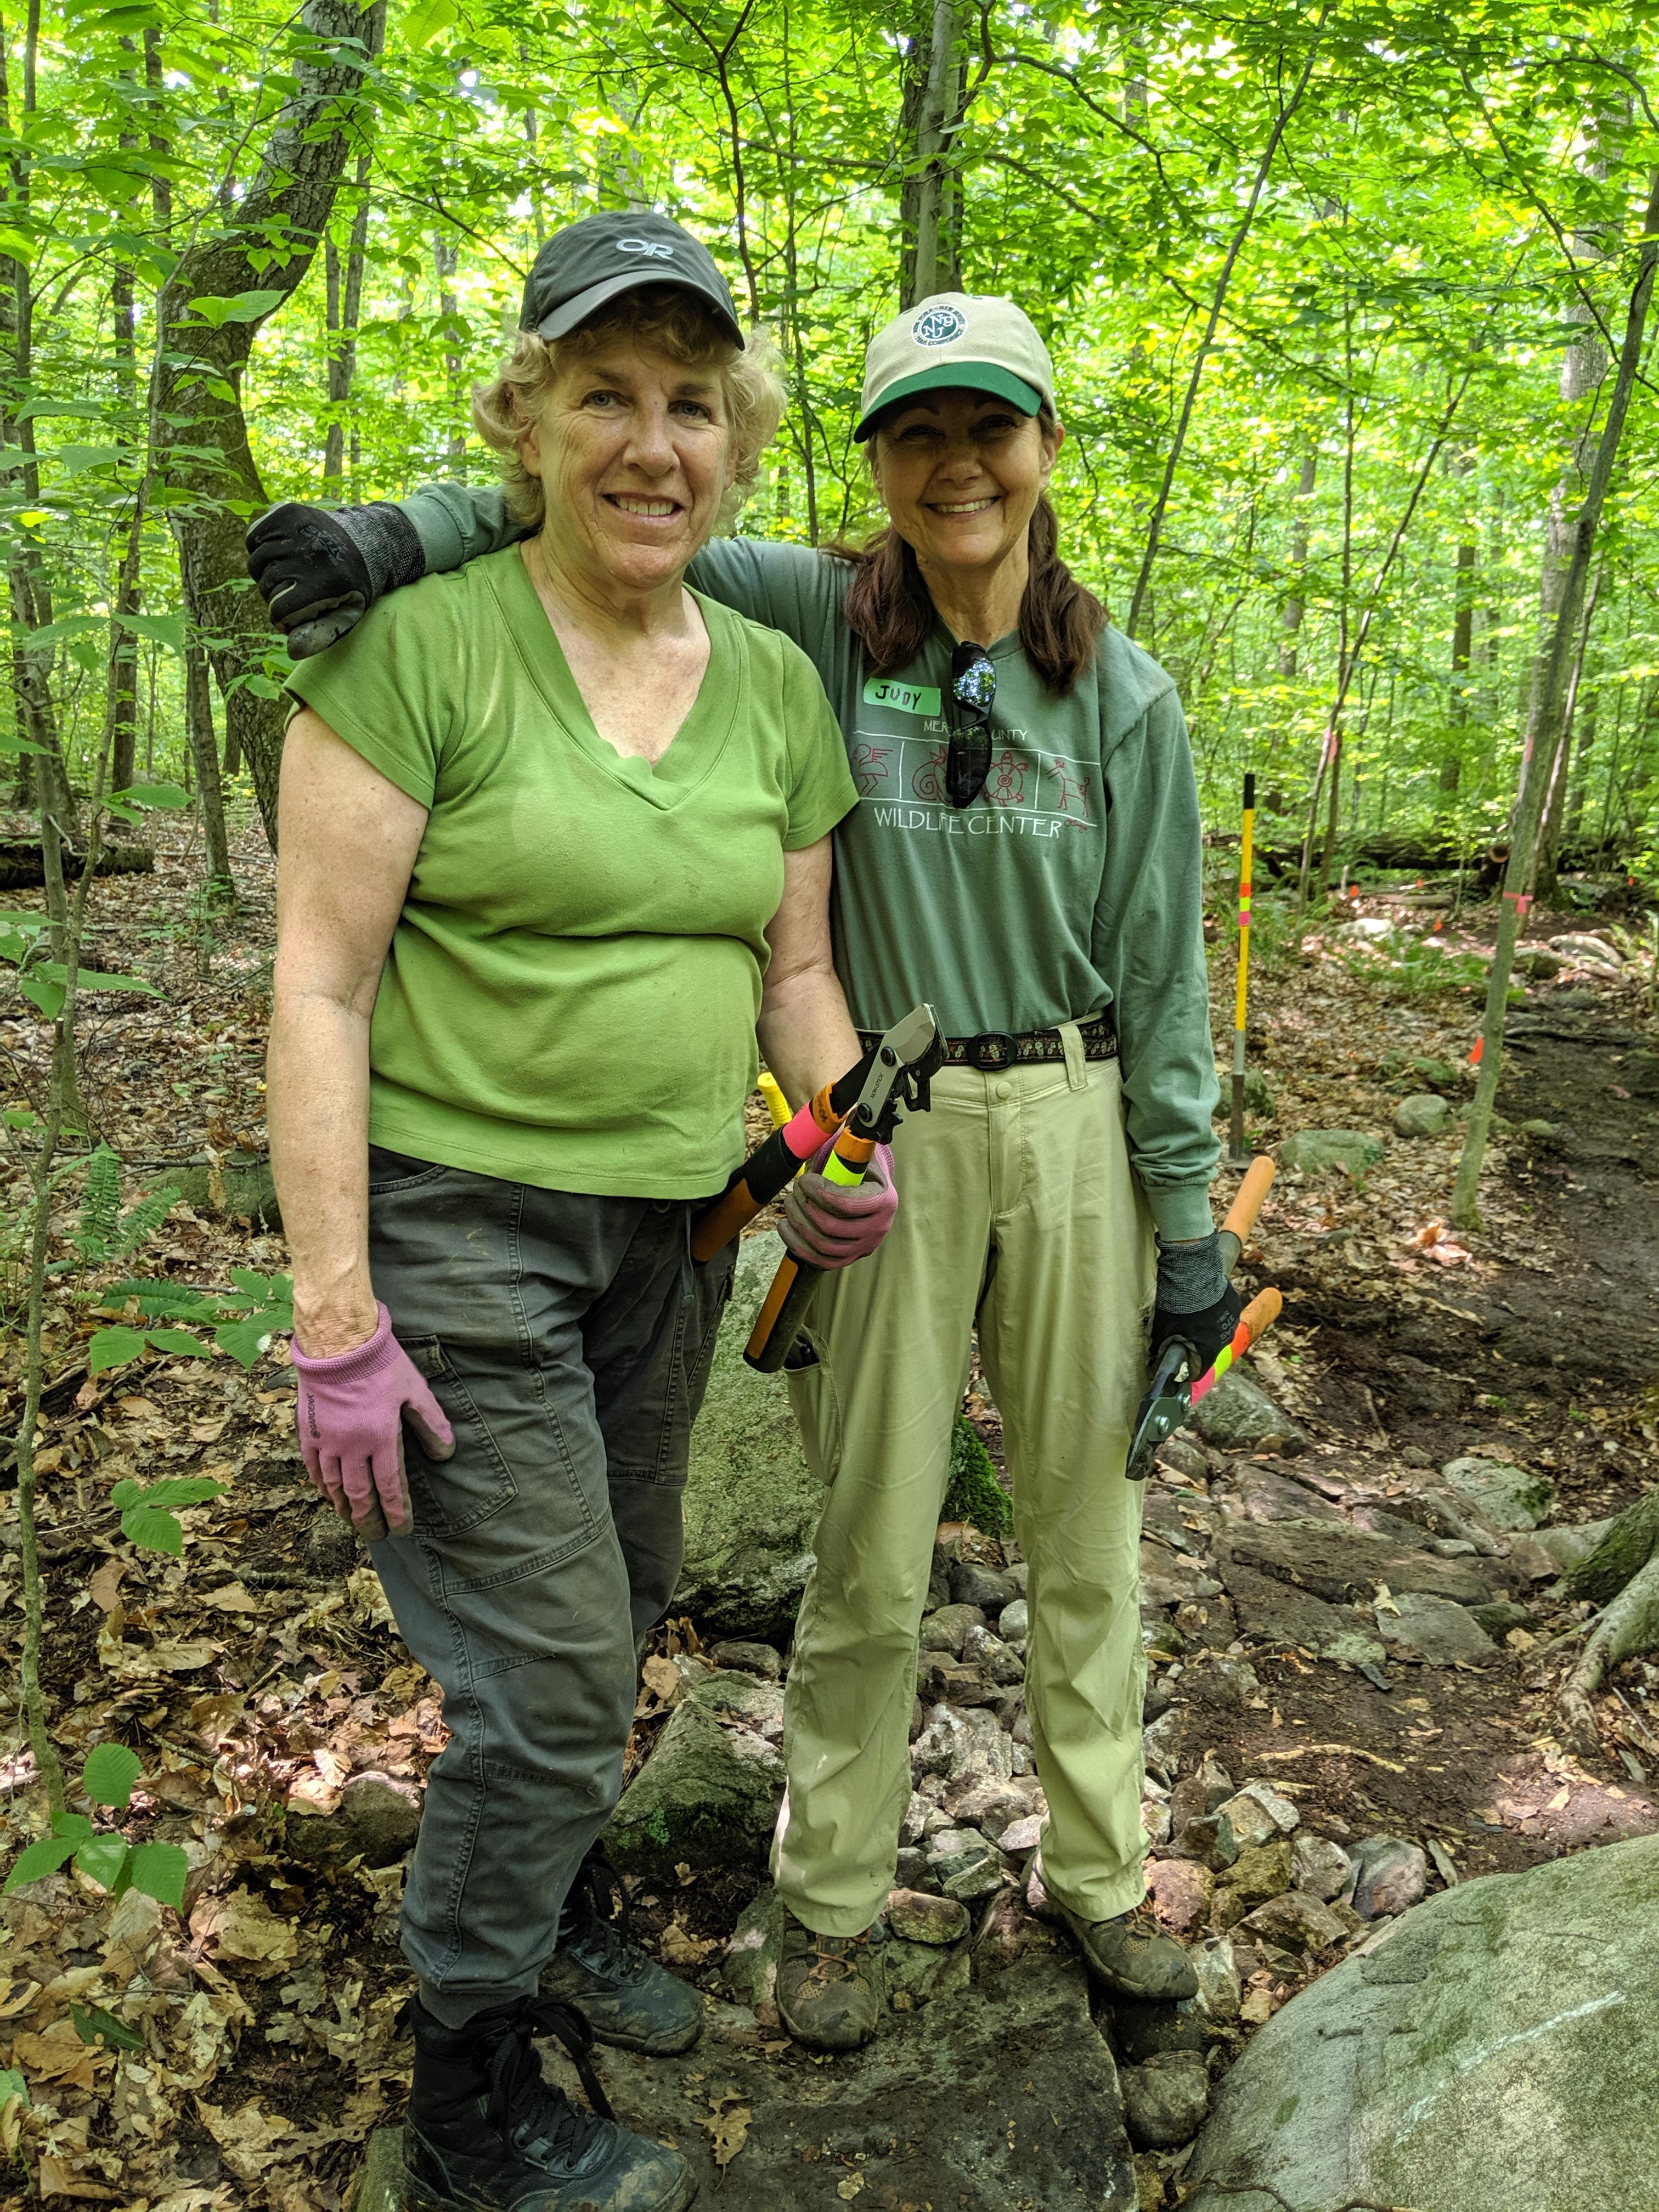 Volunteers from the Trail Conference and JORBA worked on the Crossover Trail in Ringwood State Park in New Jersey on National Trails Day, June 1, 2019. Photo credit: Amber Ray